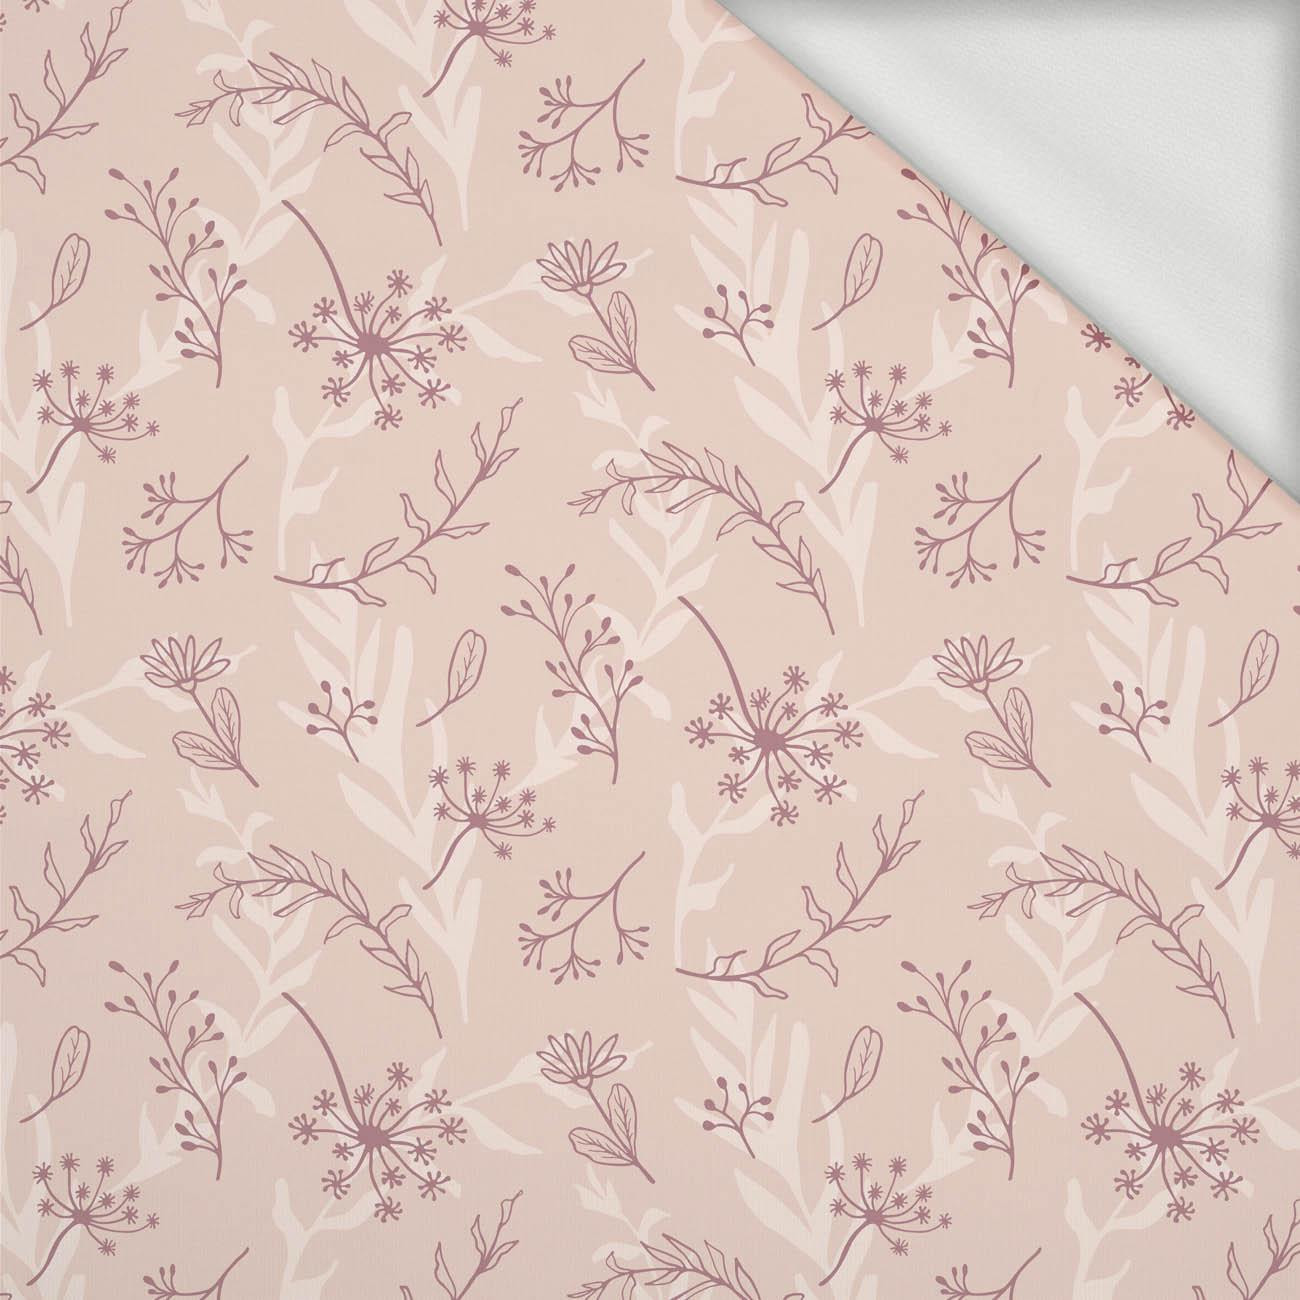 PINK LEAVES PAT. 2 - looped knit fabric